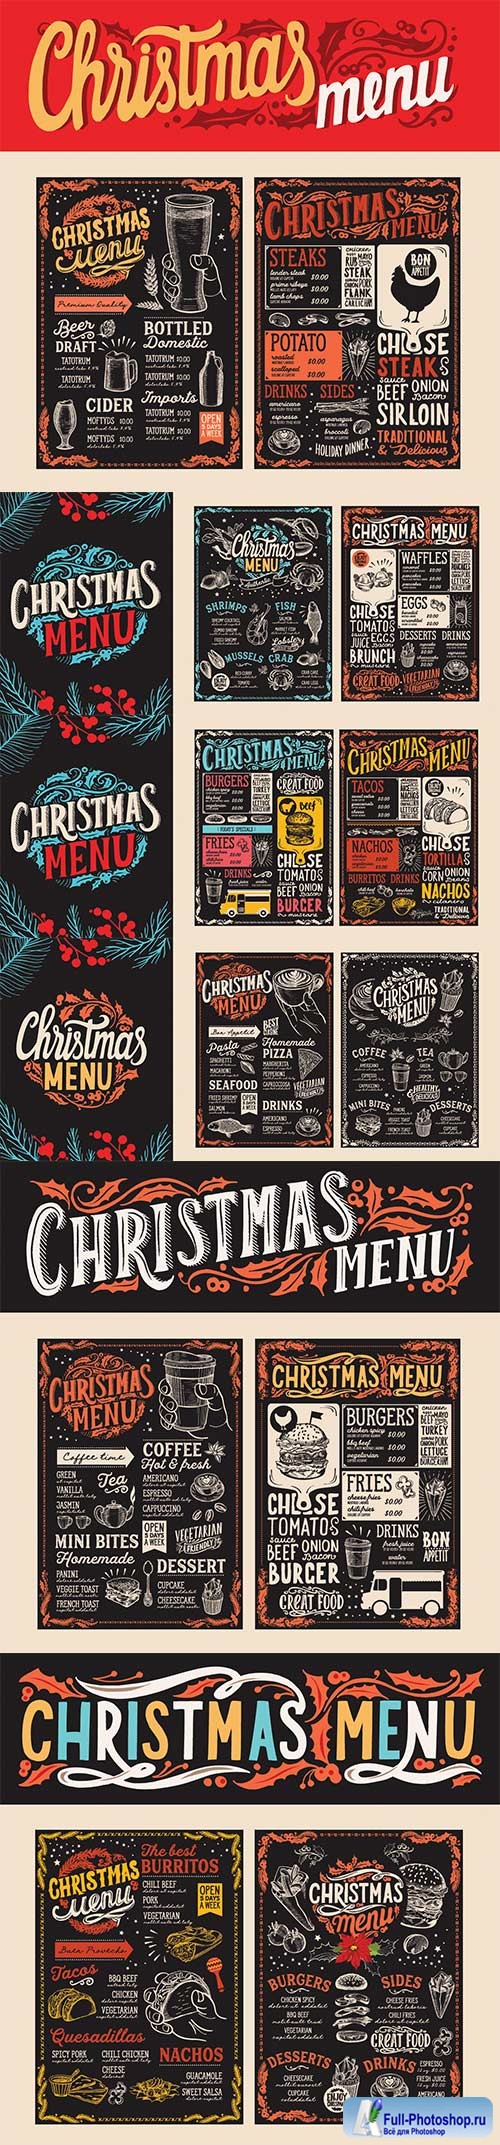 Christmas menu food template for restaurant with doodle 